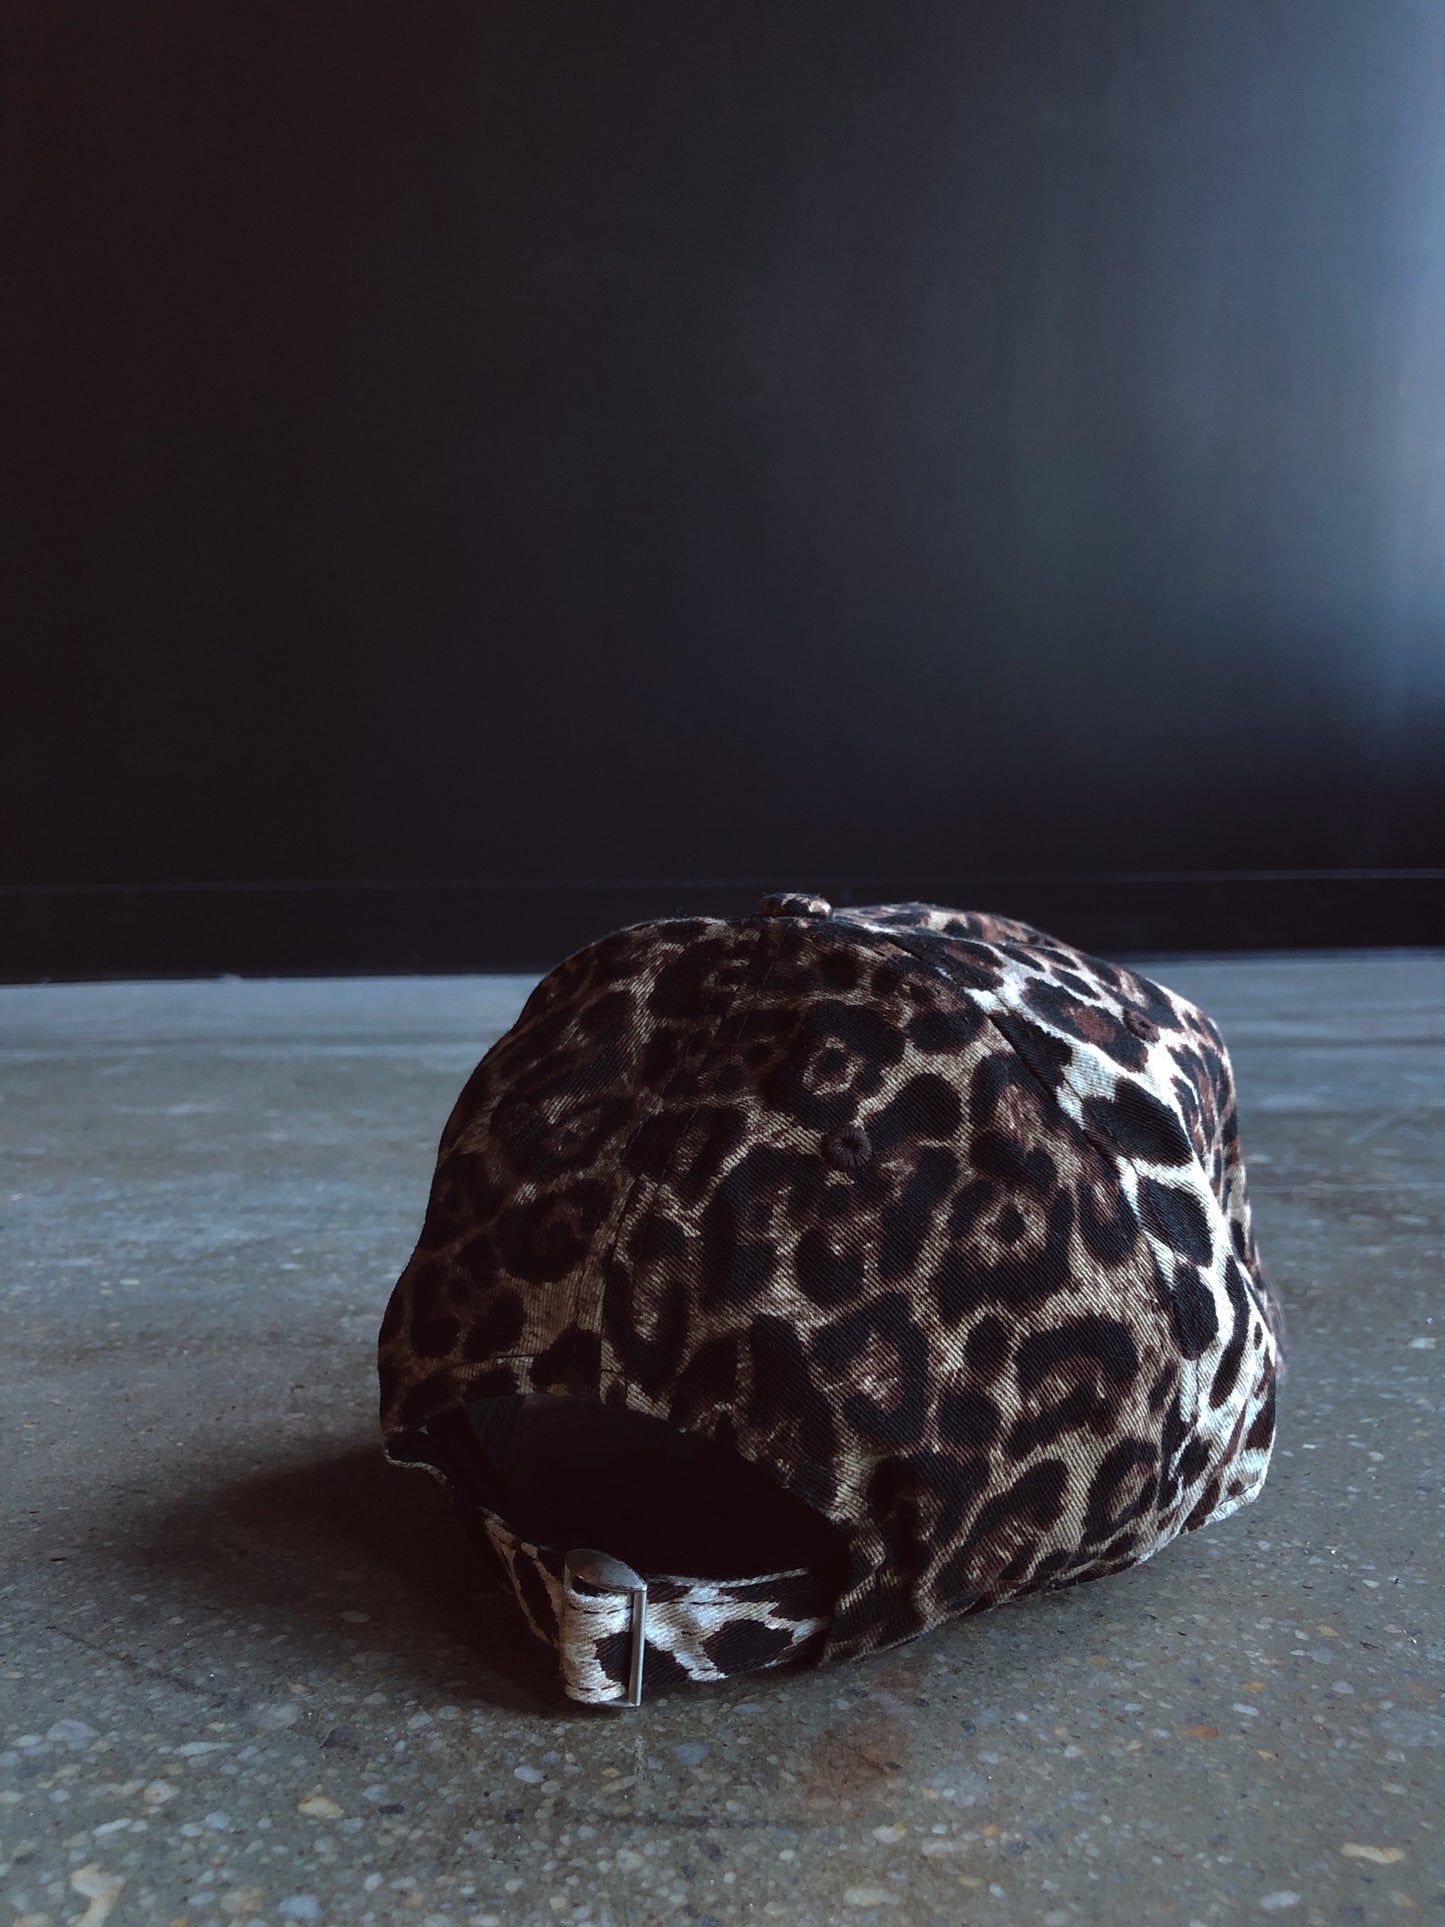 Blessed Leopard Hat (Non-Distressed)